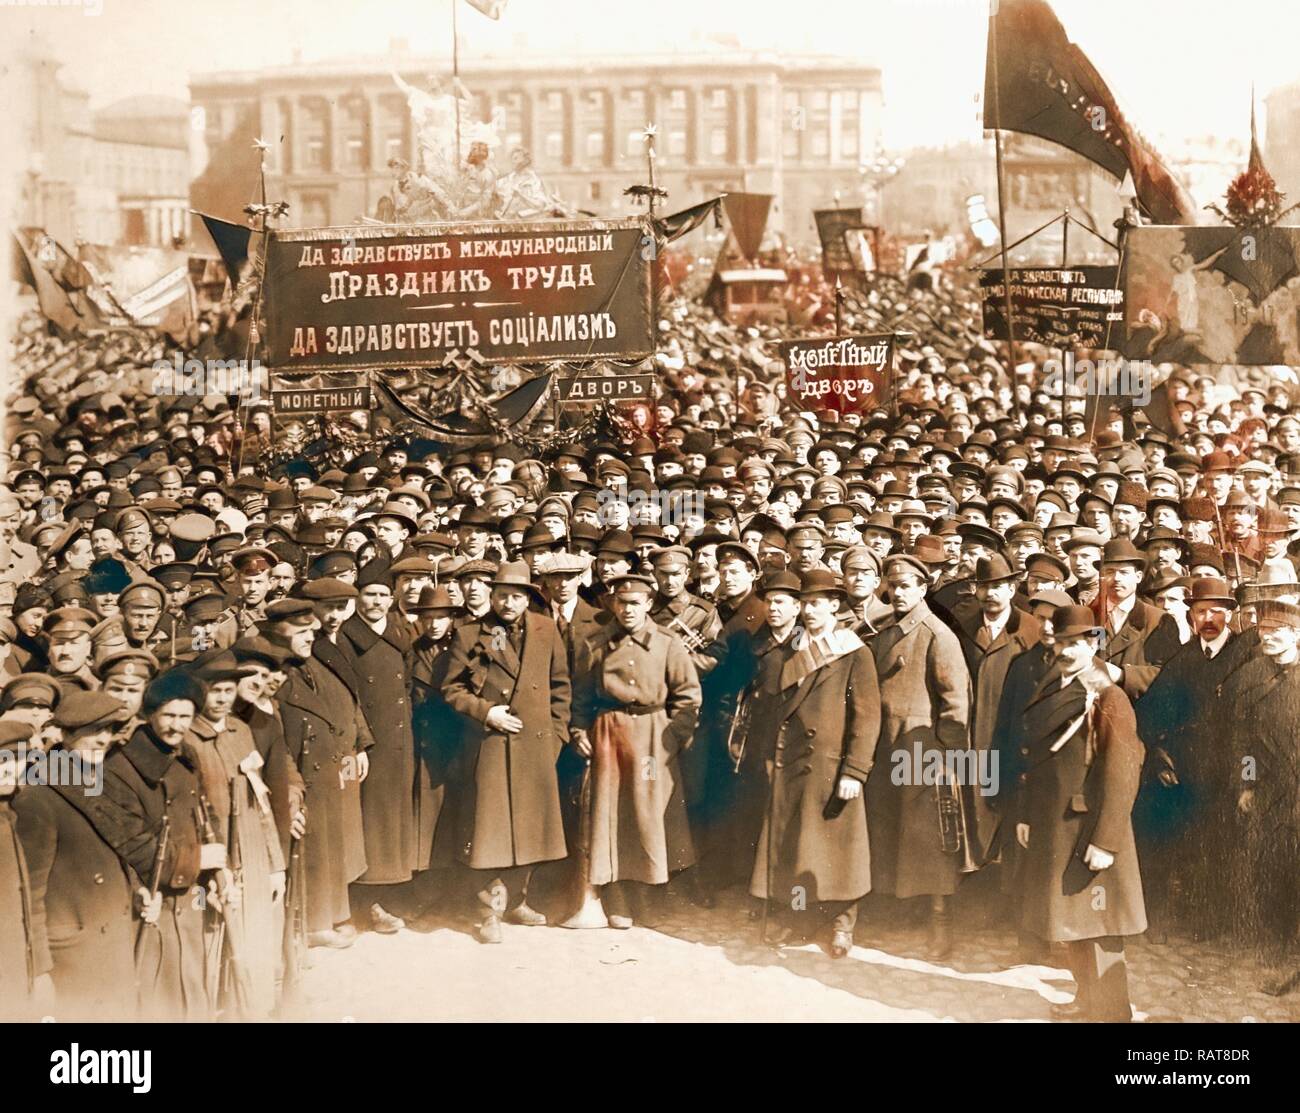 May 1st, 1918, The demonstration took place on Palace Square in Petrograd, Saint Petersburg in front of the Winter reimagined Stock Photo